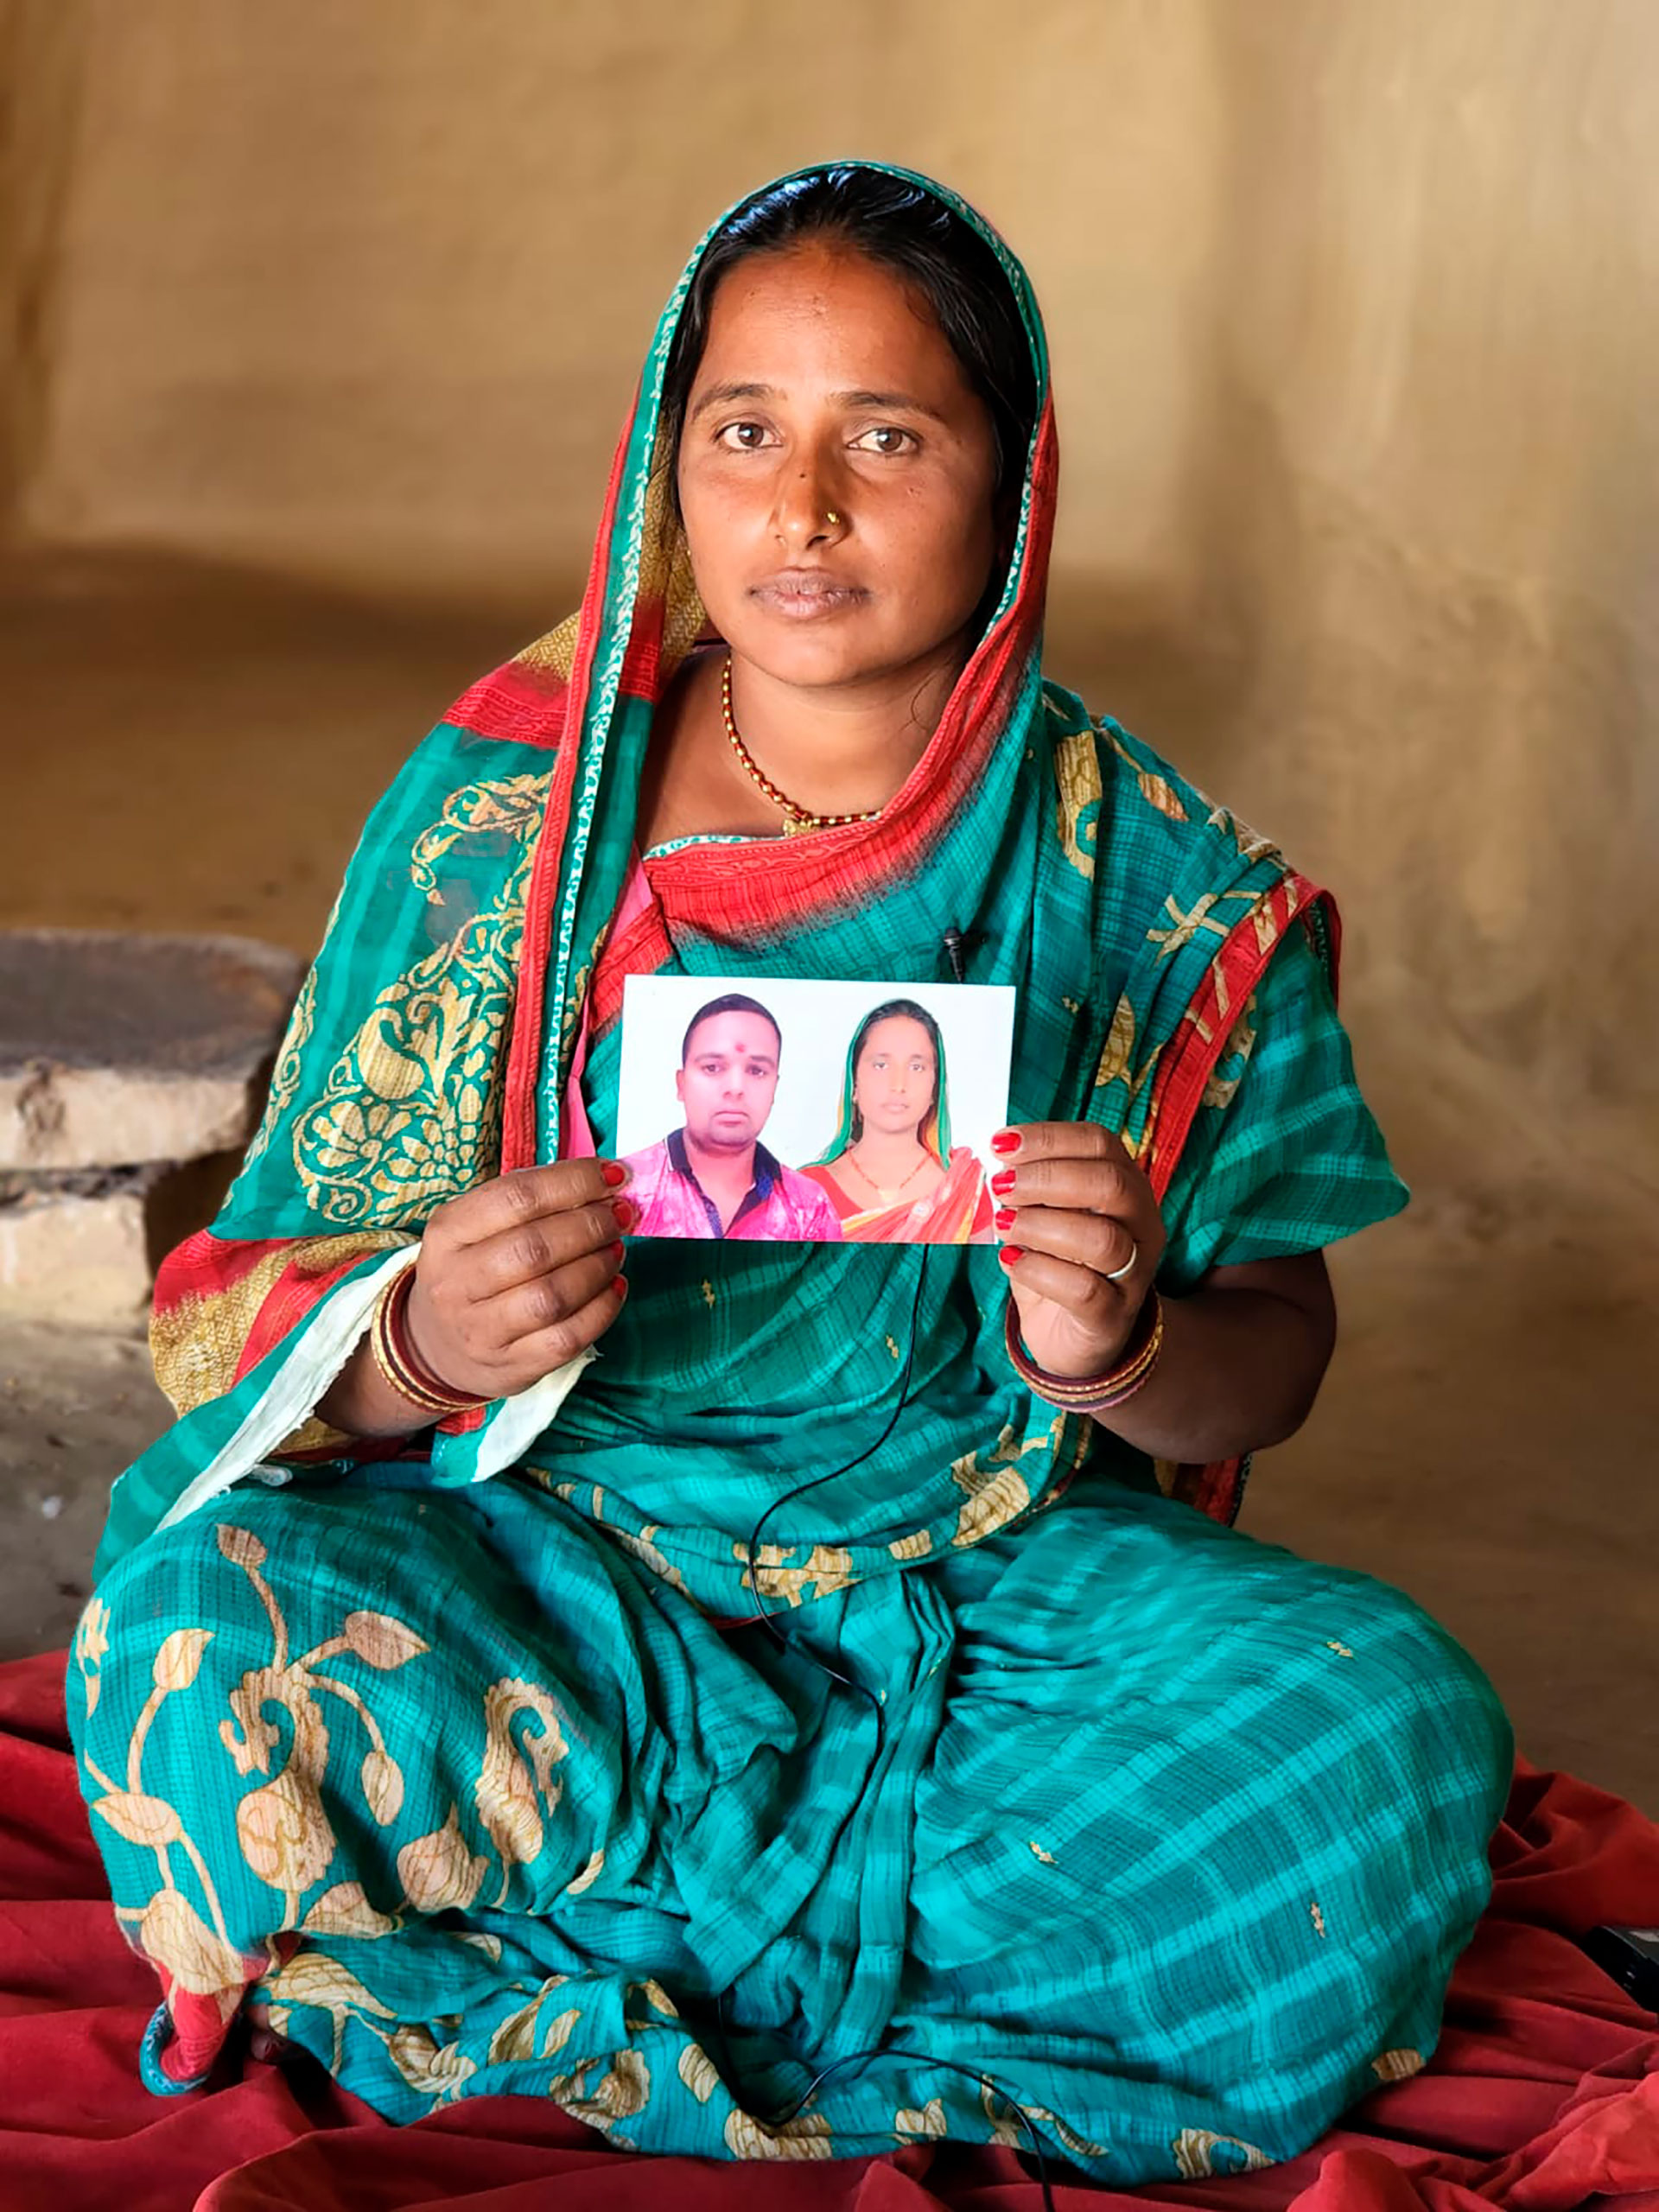 Sunita Yadav, lost her husband, was left alone in charge of her young children